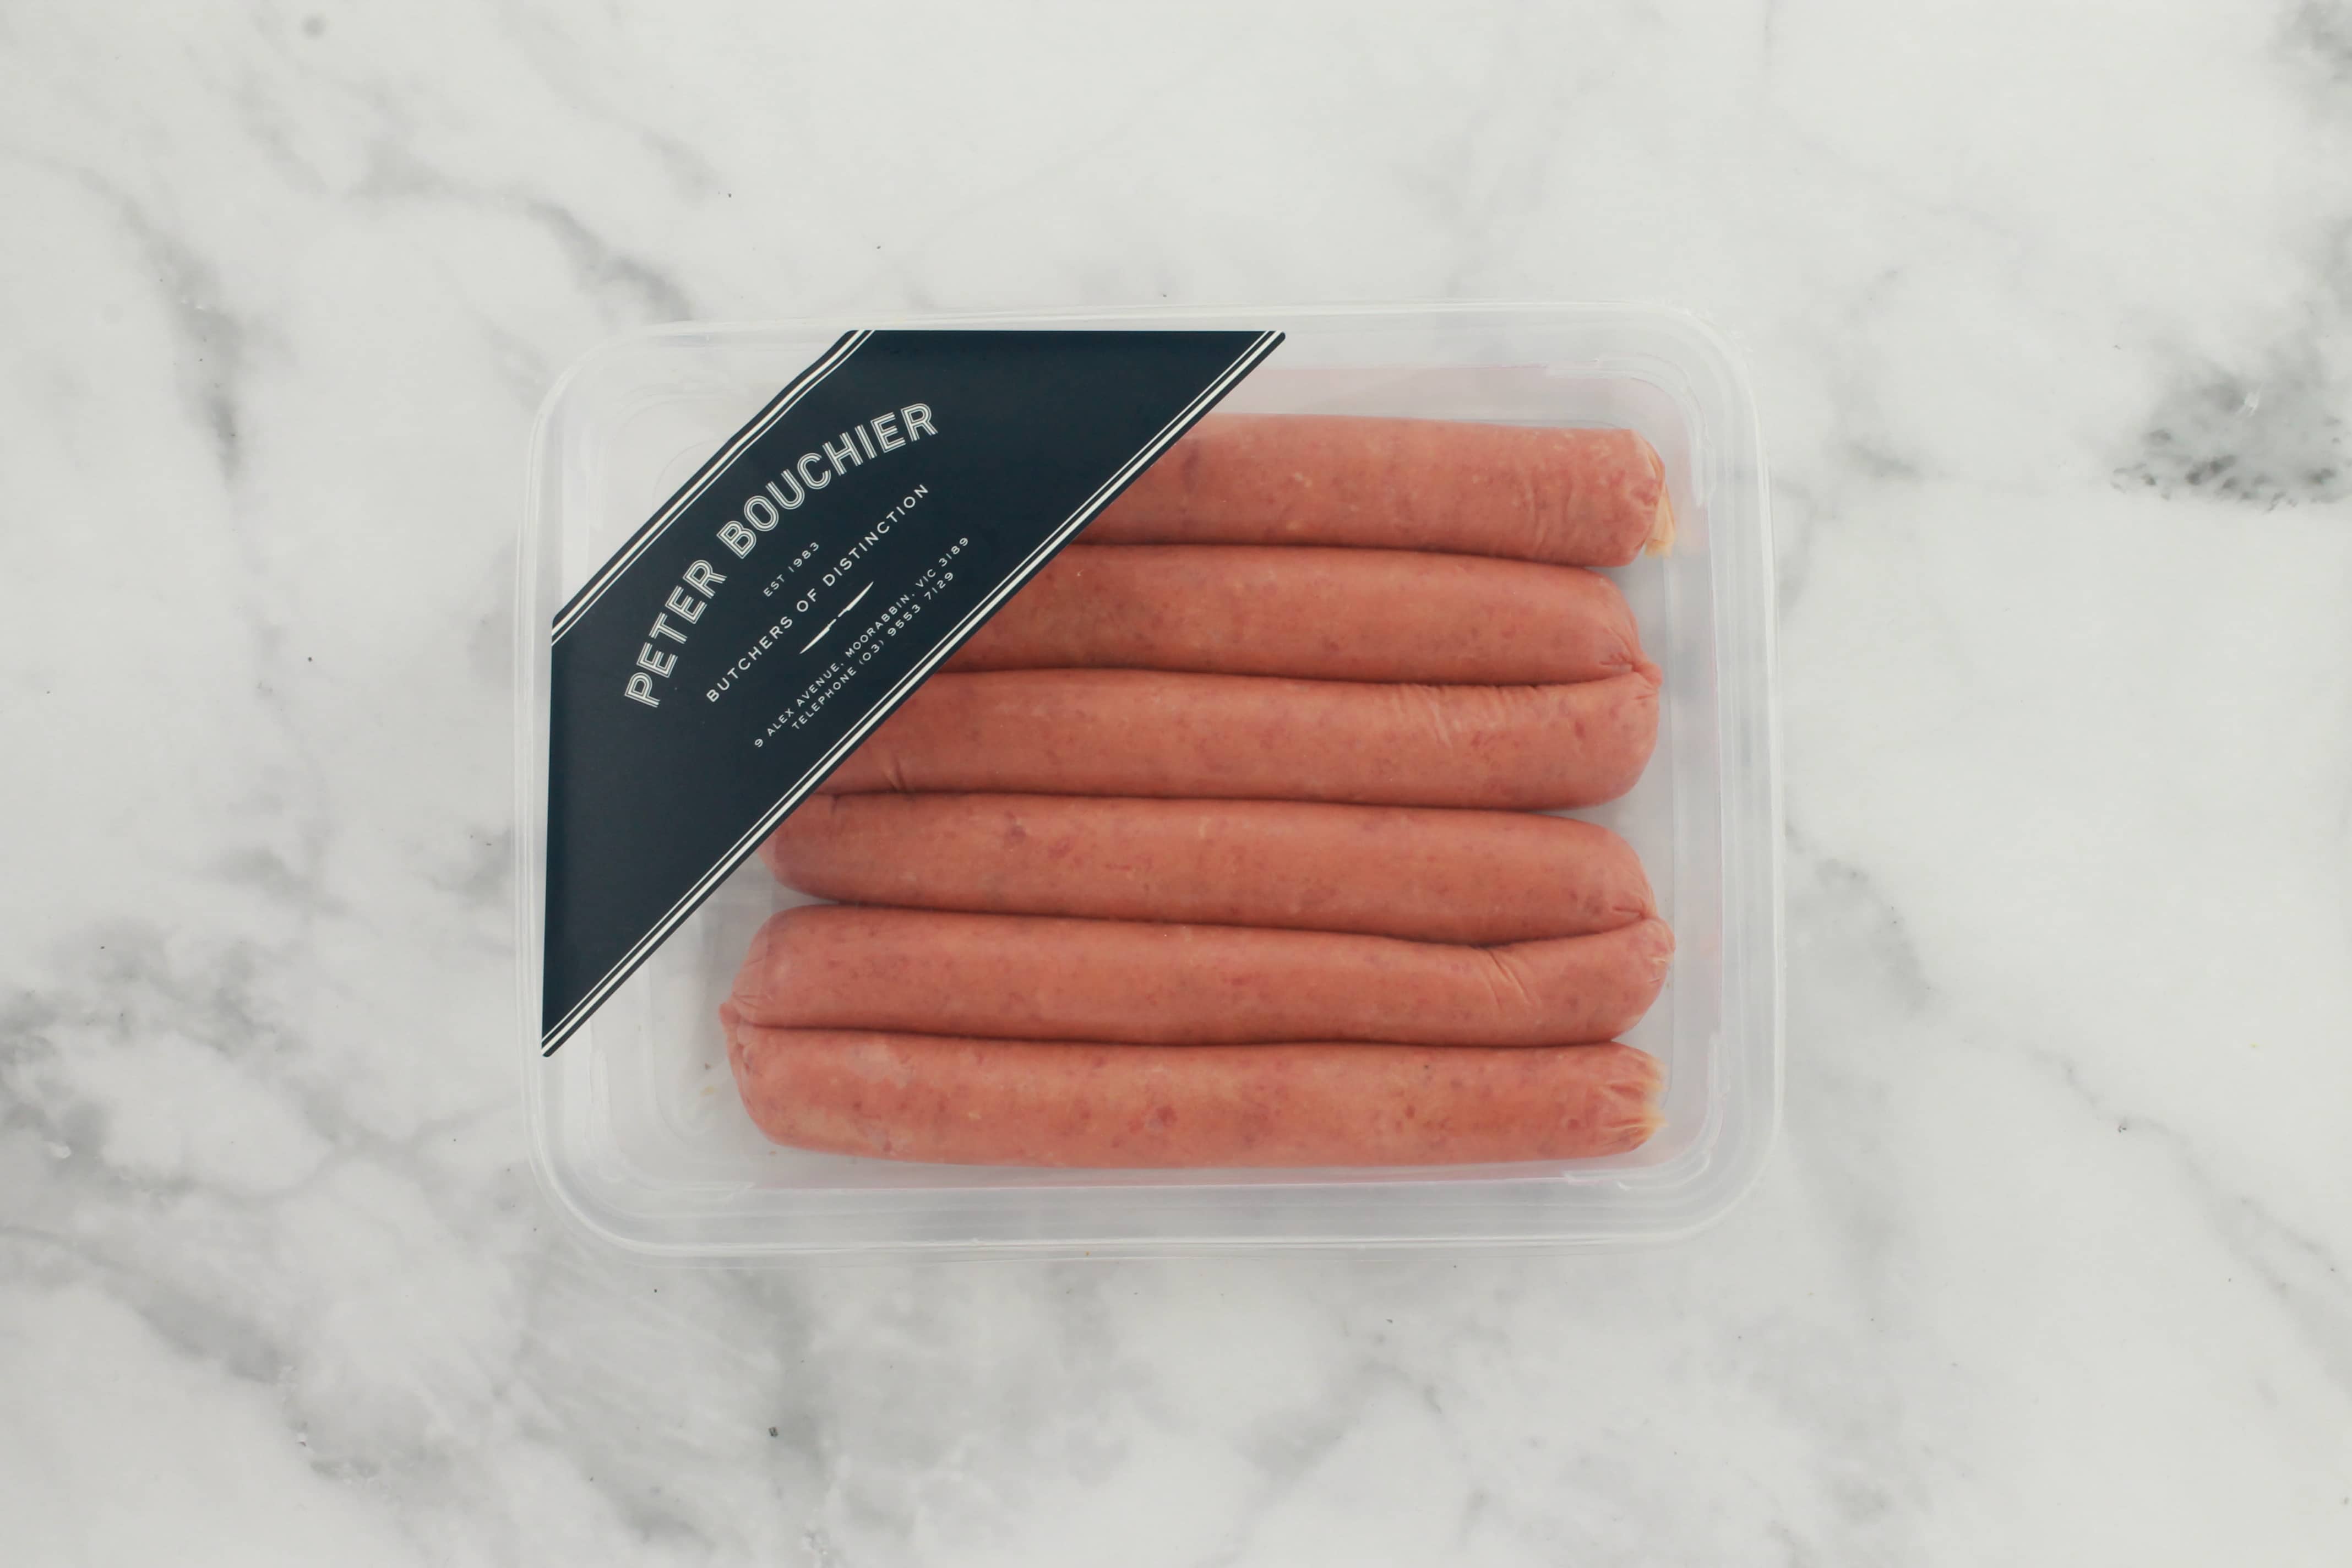 Peter Bouchier Thin Beef Sausages - Grass Fed (6 PK)